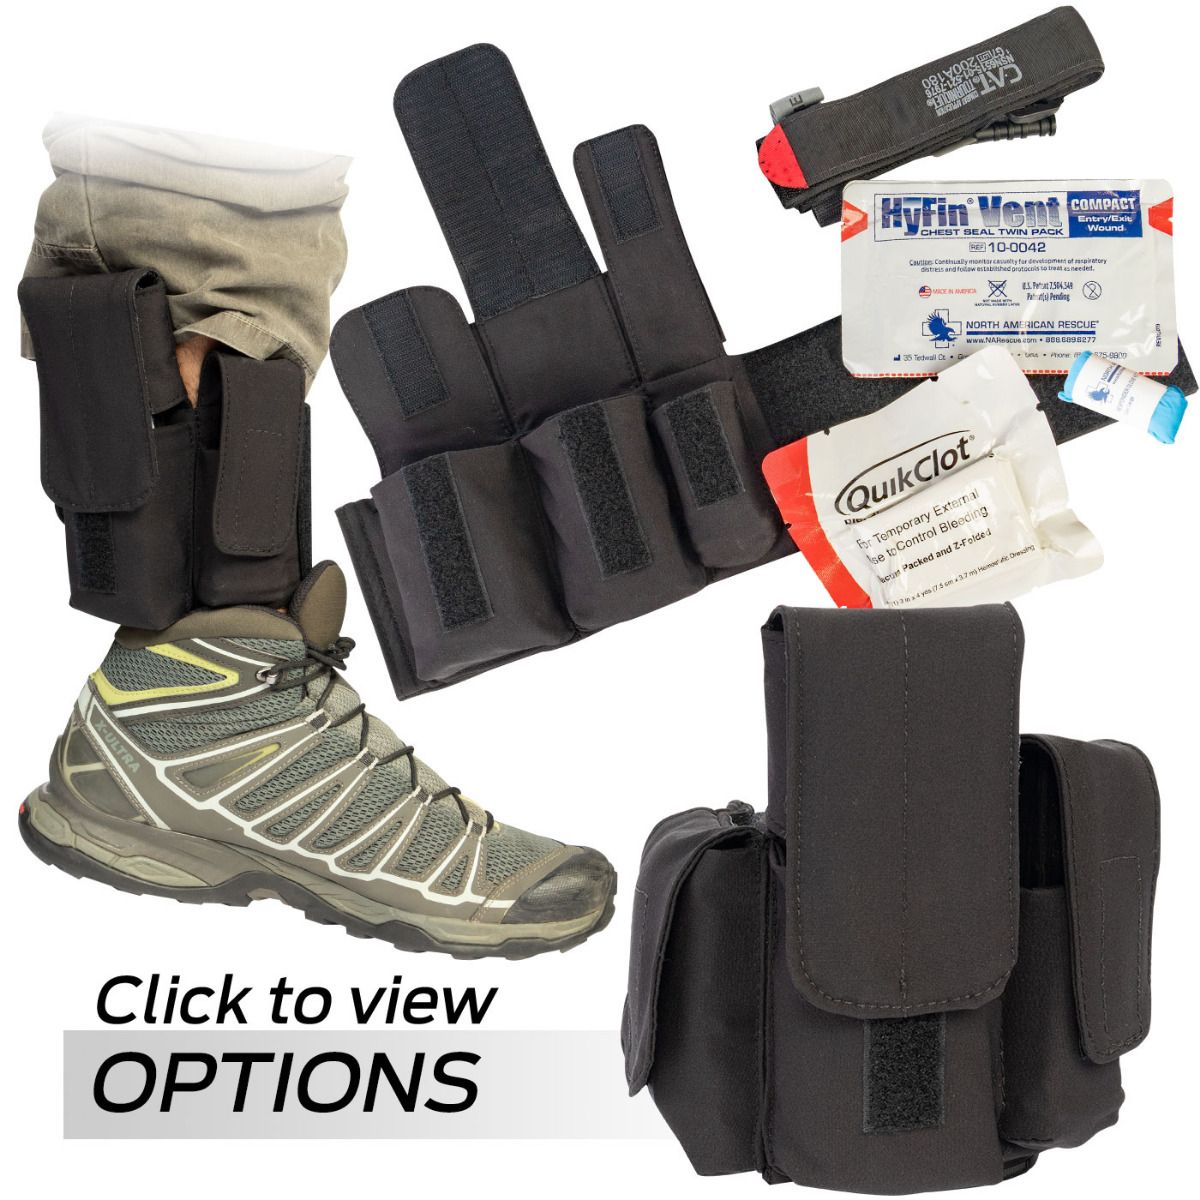 EVERY DAY CARRY (EDC) ANKLE TRAUMA KITS (North American Rescue)